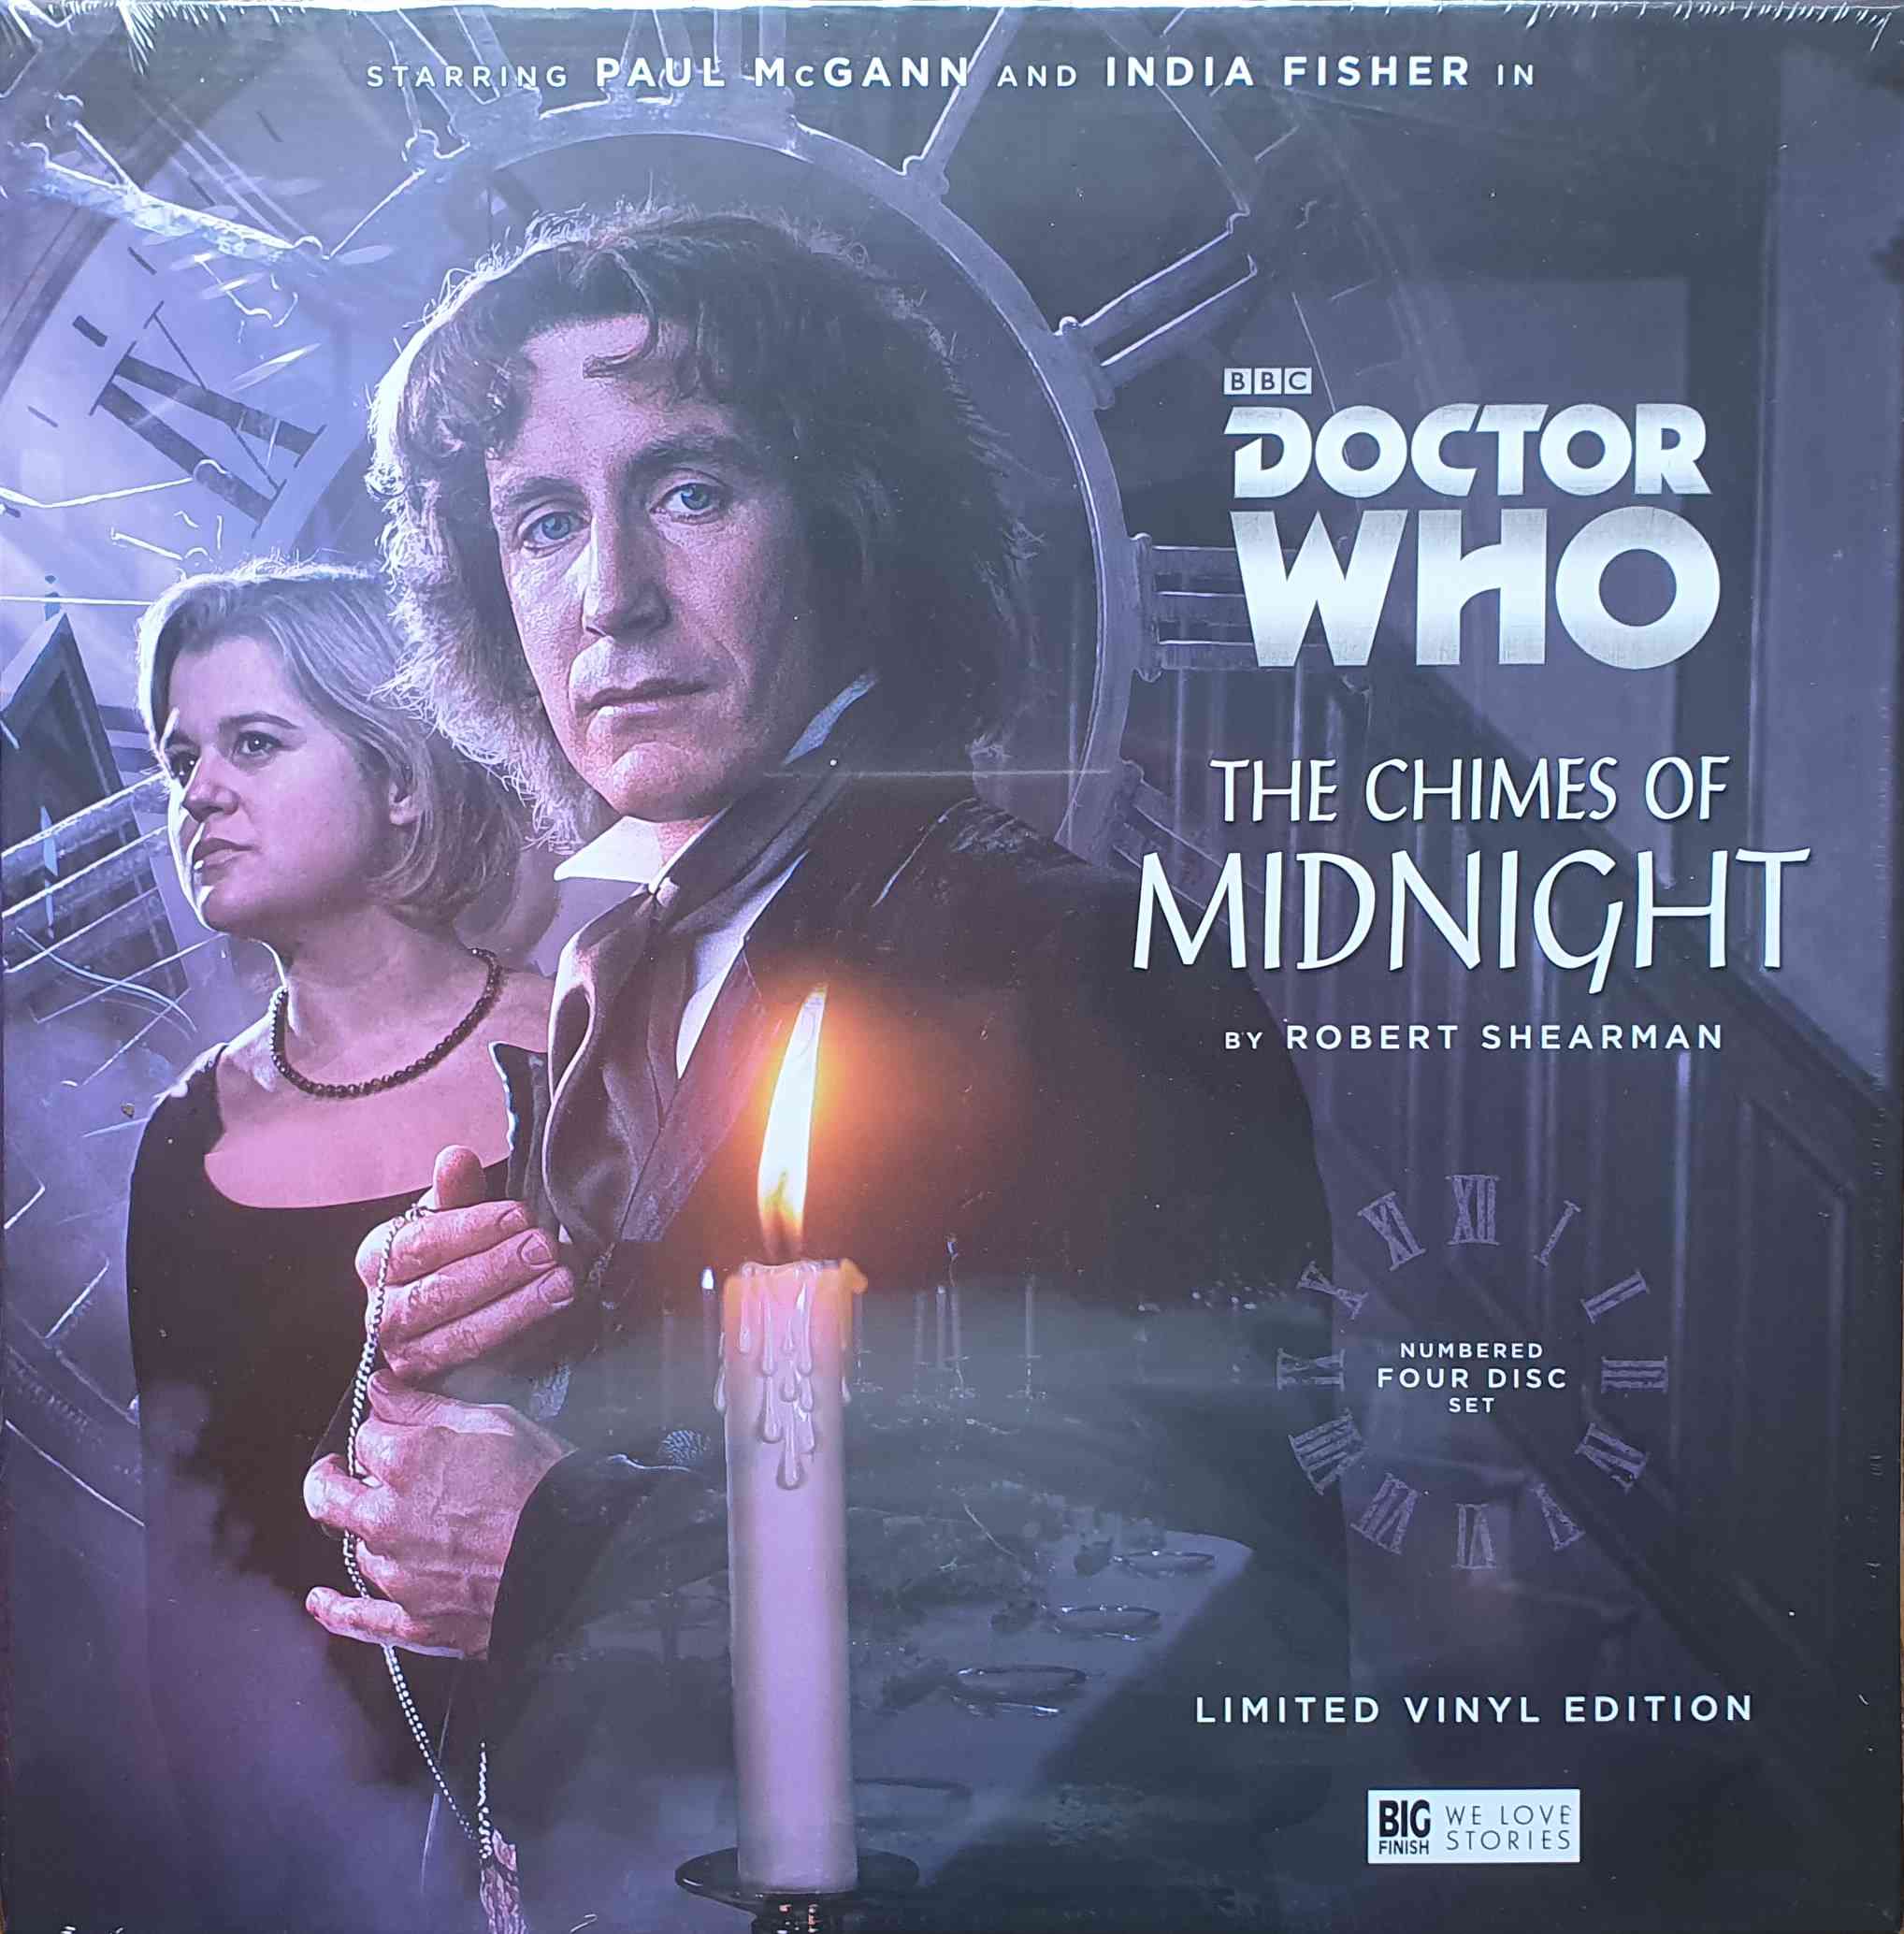 Picture of BFPDWCD8GLP Doctor Who - The chimes of midnight - Limited edition by artist Robert Shearman from the BBC albums - Records and Tapes library